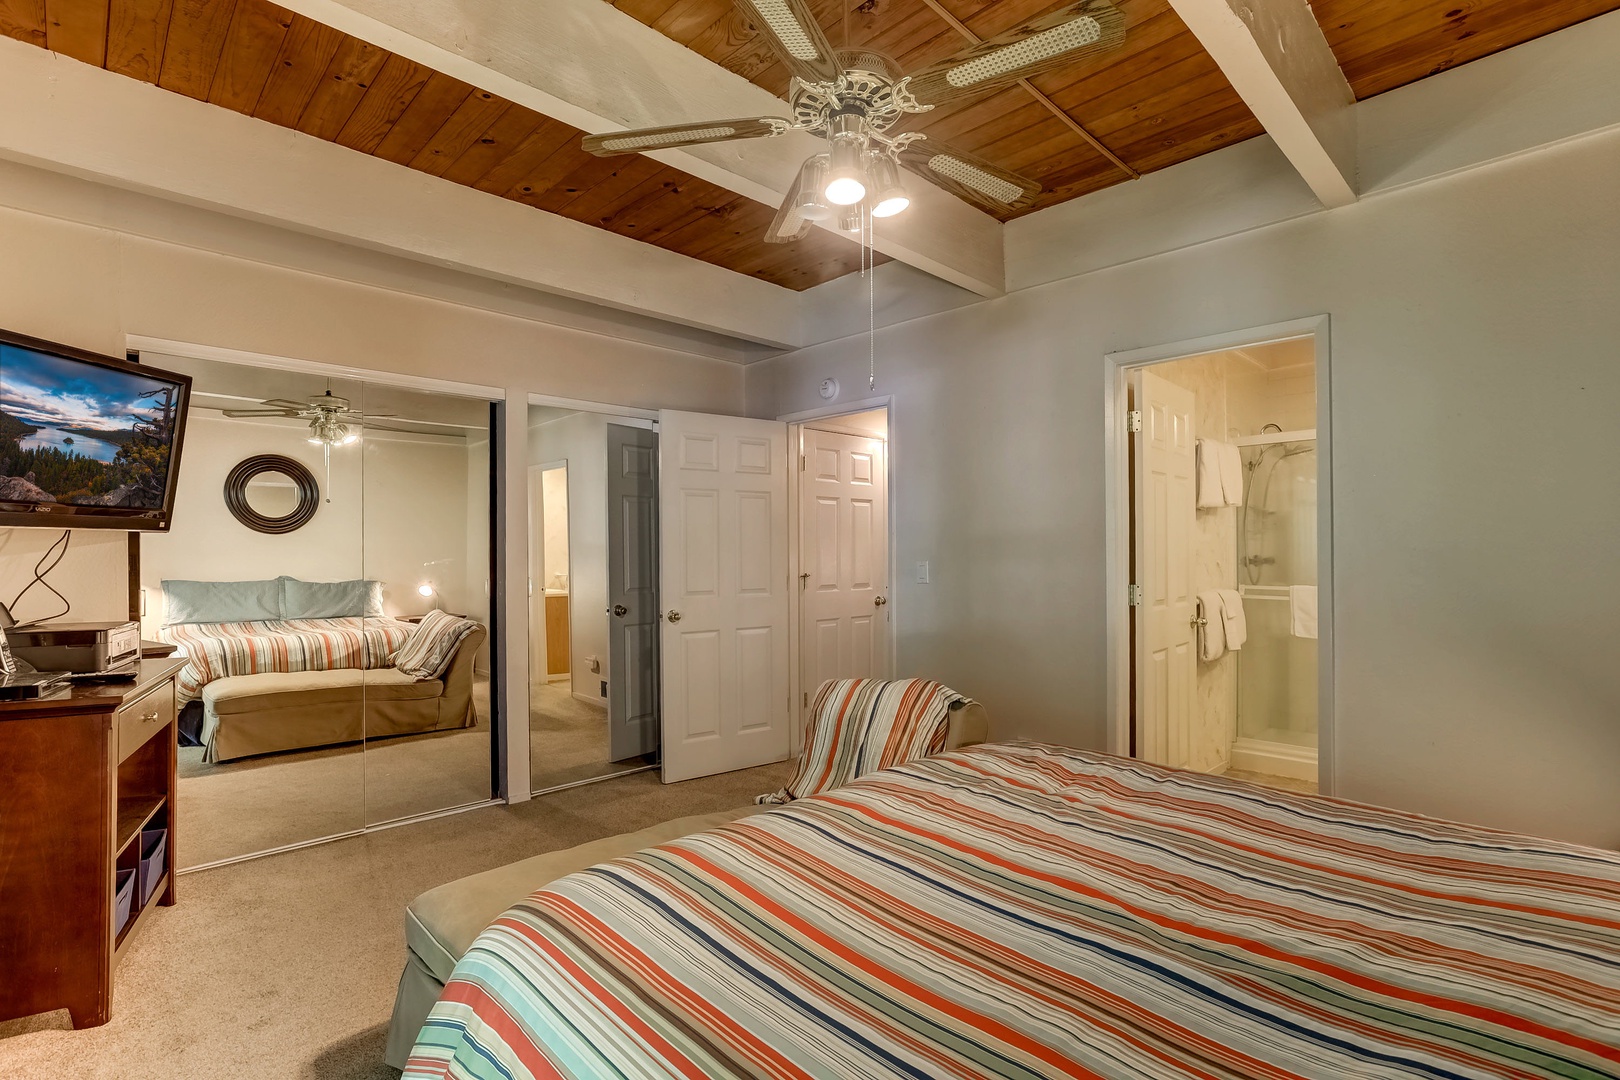 Master bedroom: King bed, cable TV, DVC player, private balcony (upstairs)